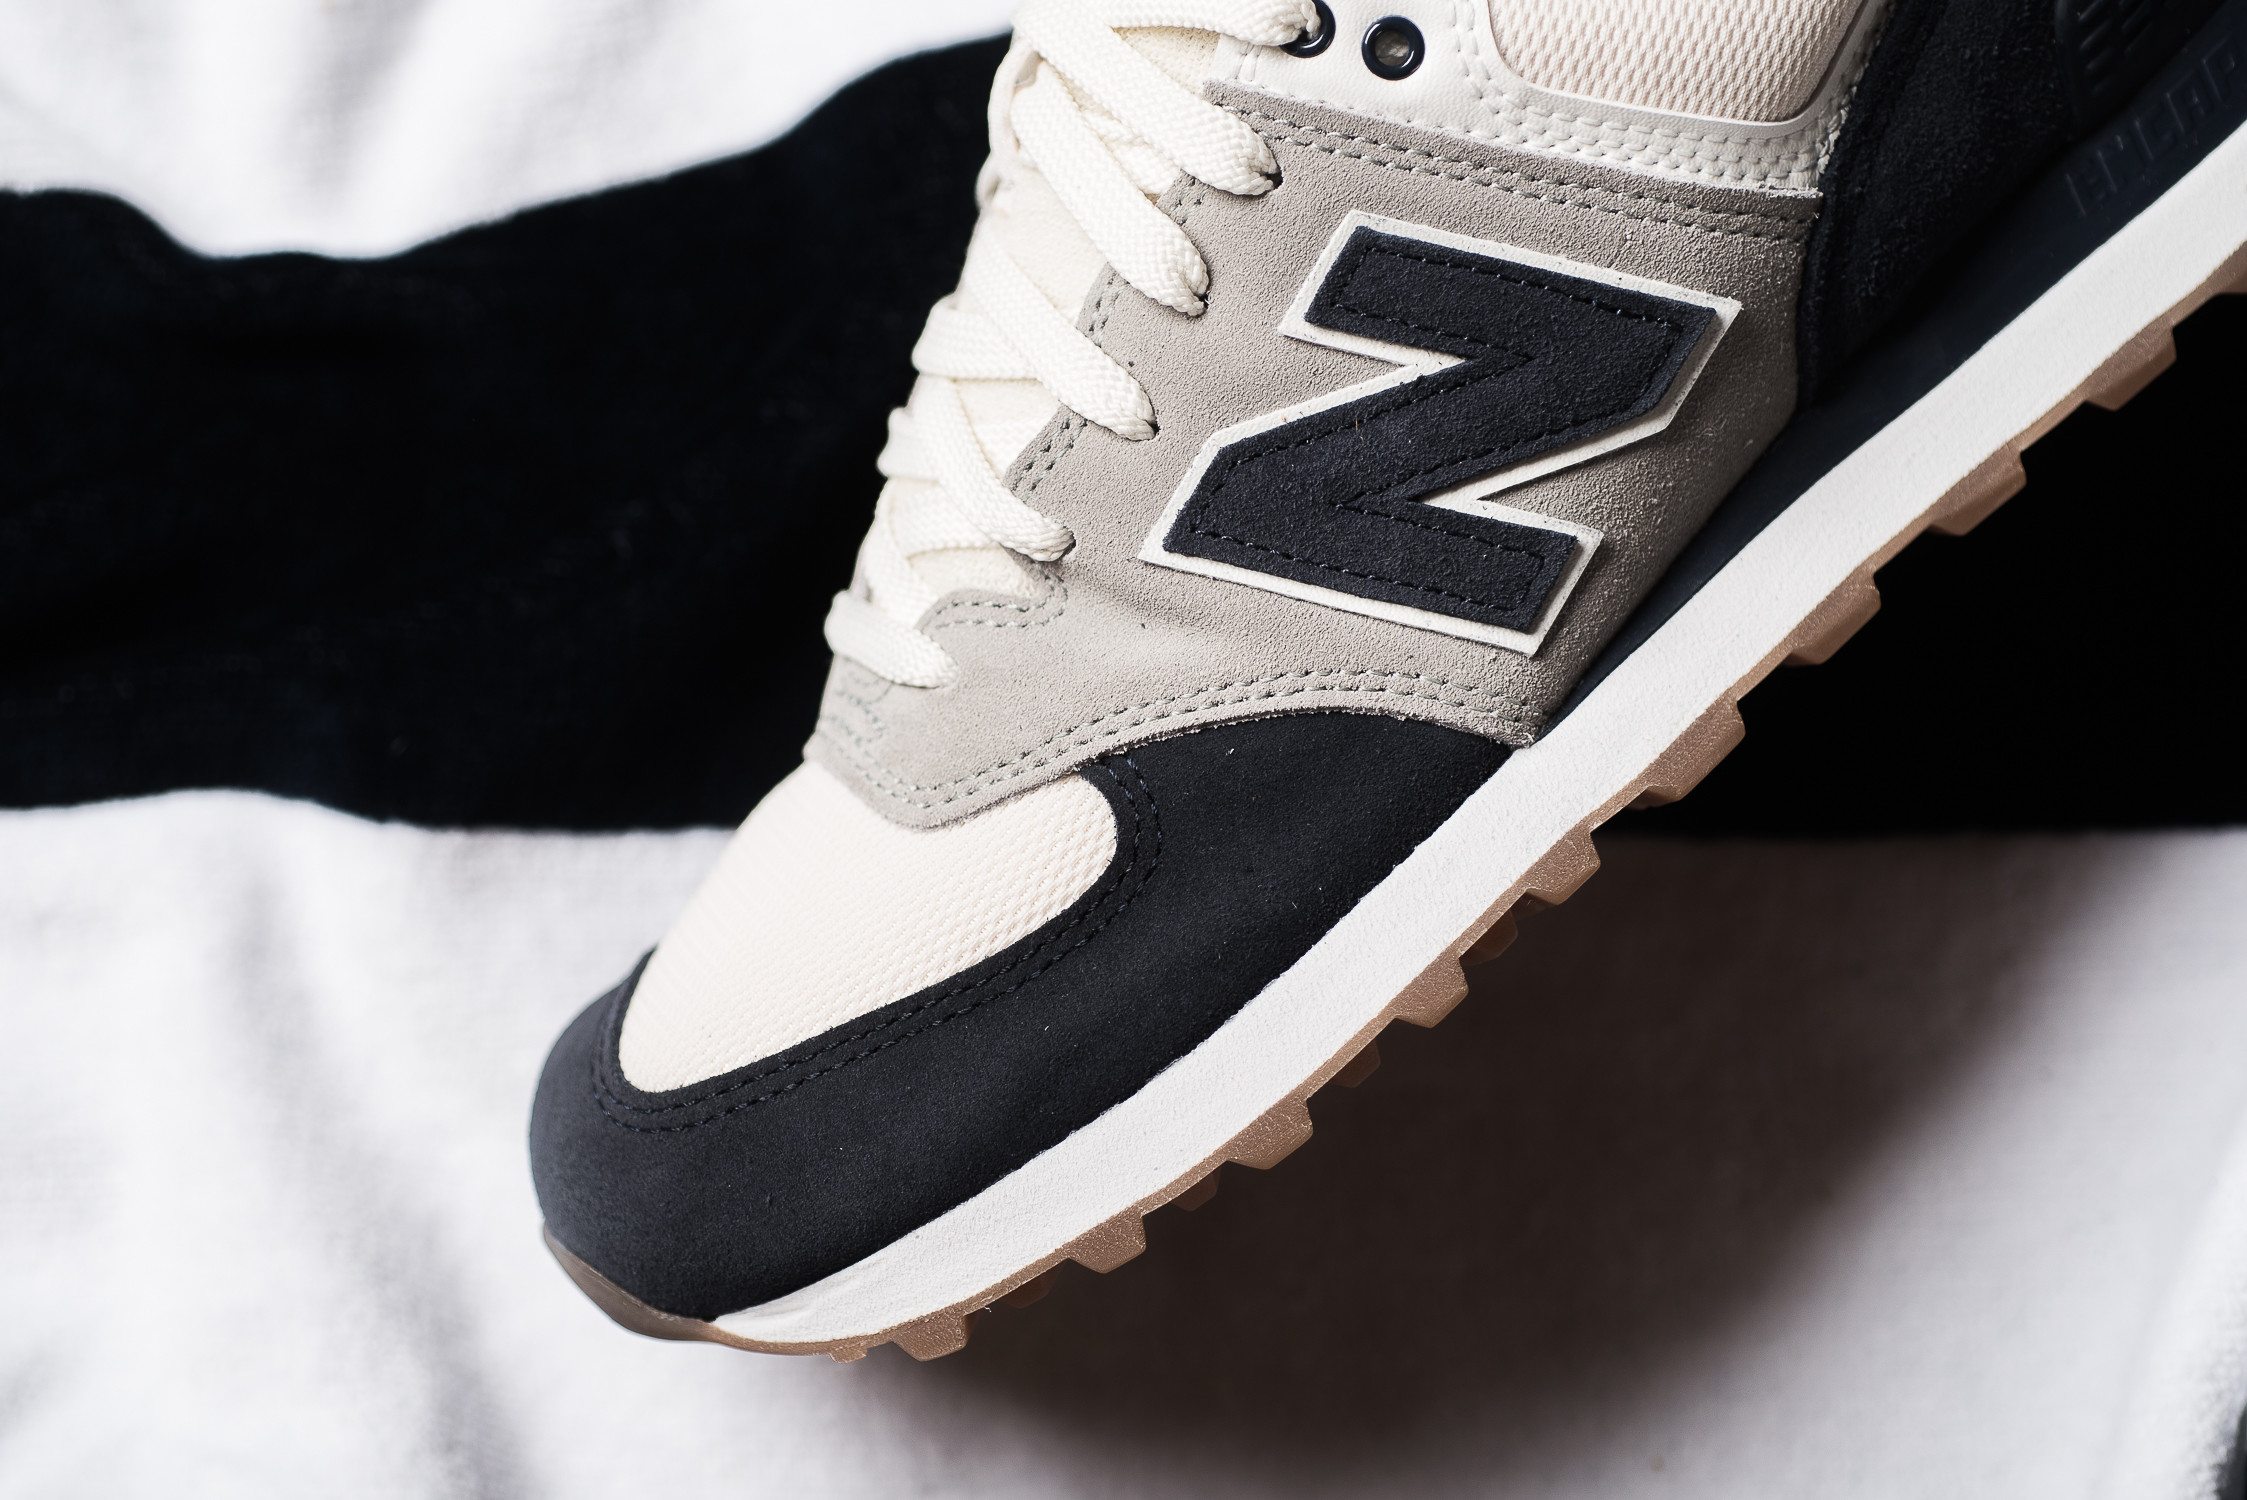 New Balance 574 "Terry Cloth" Pack